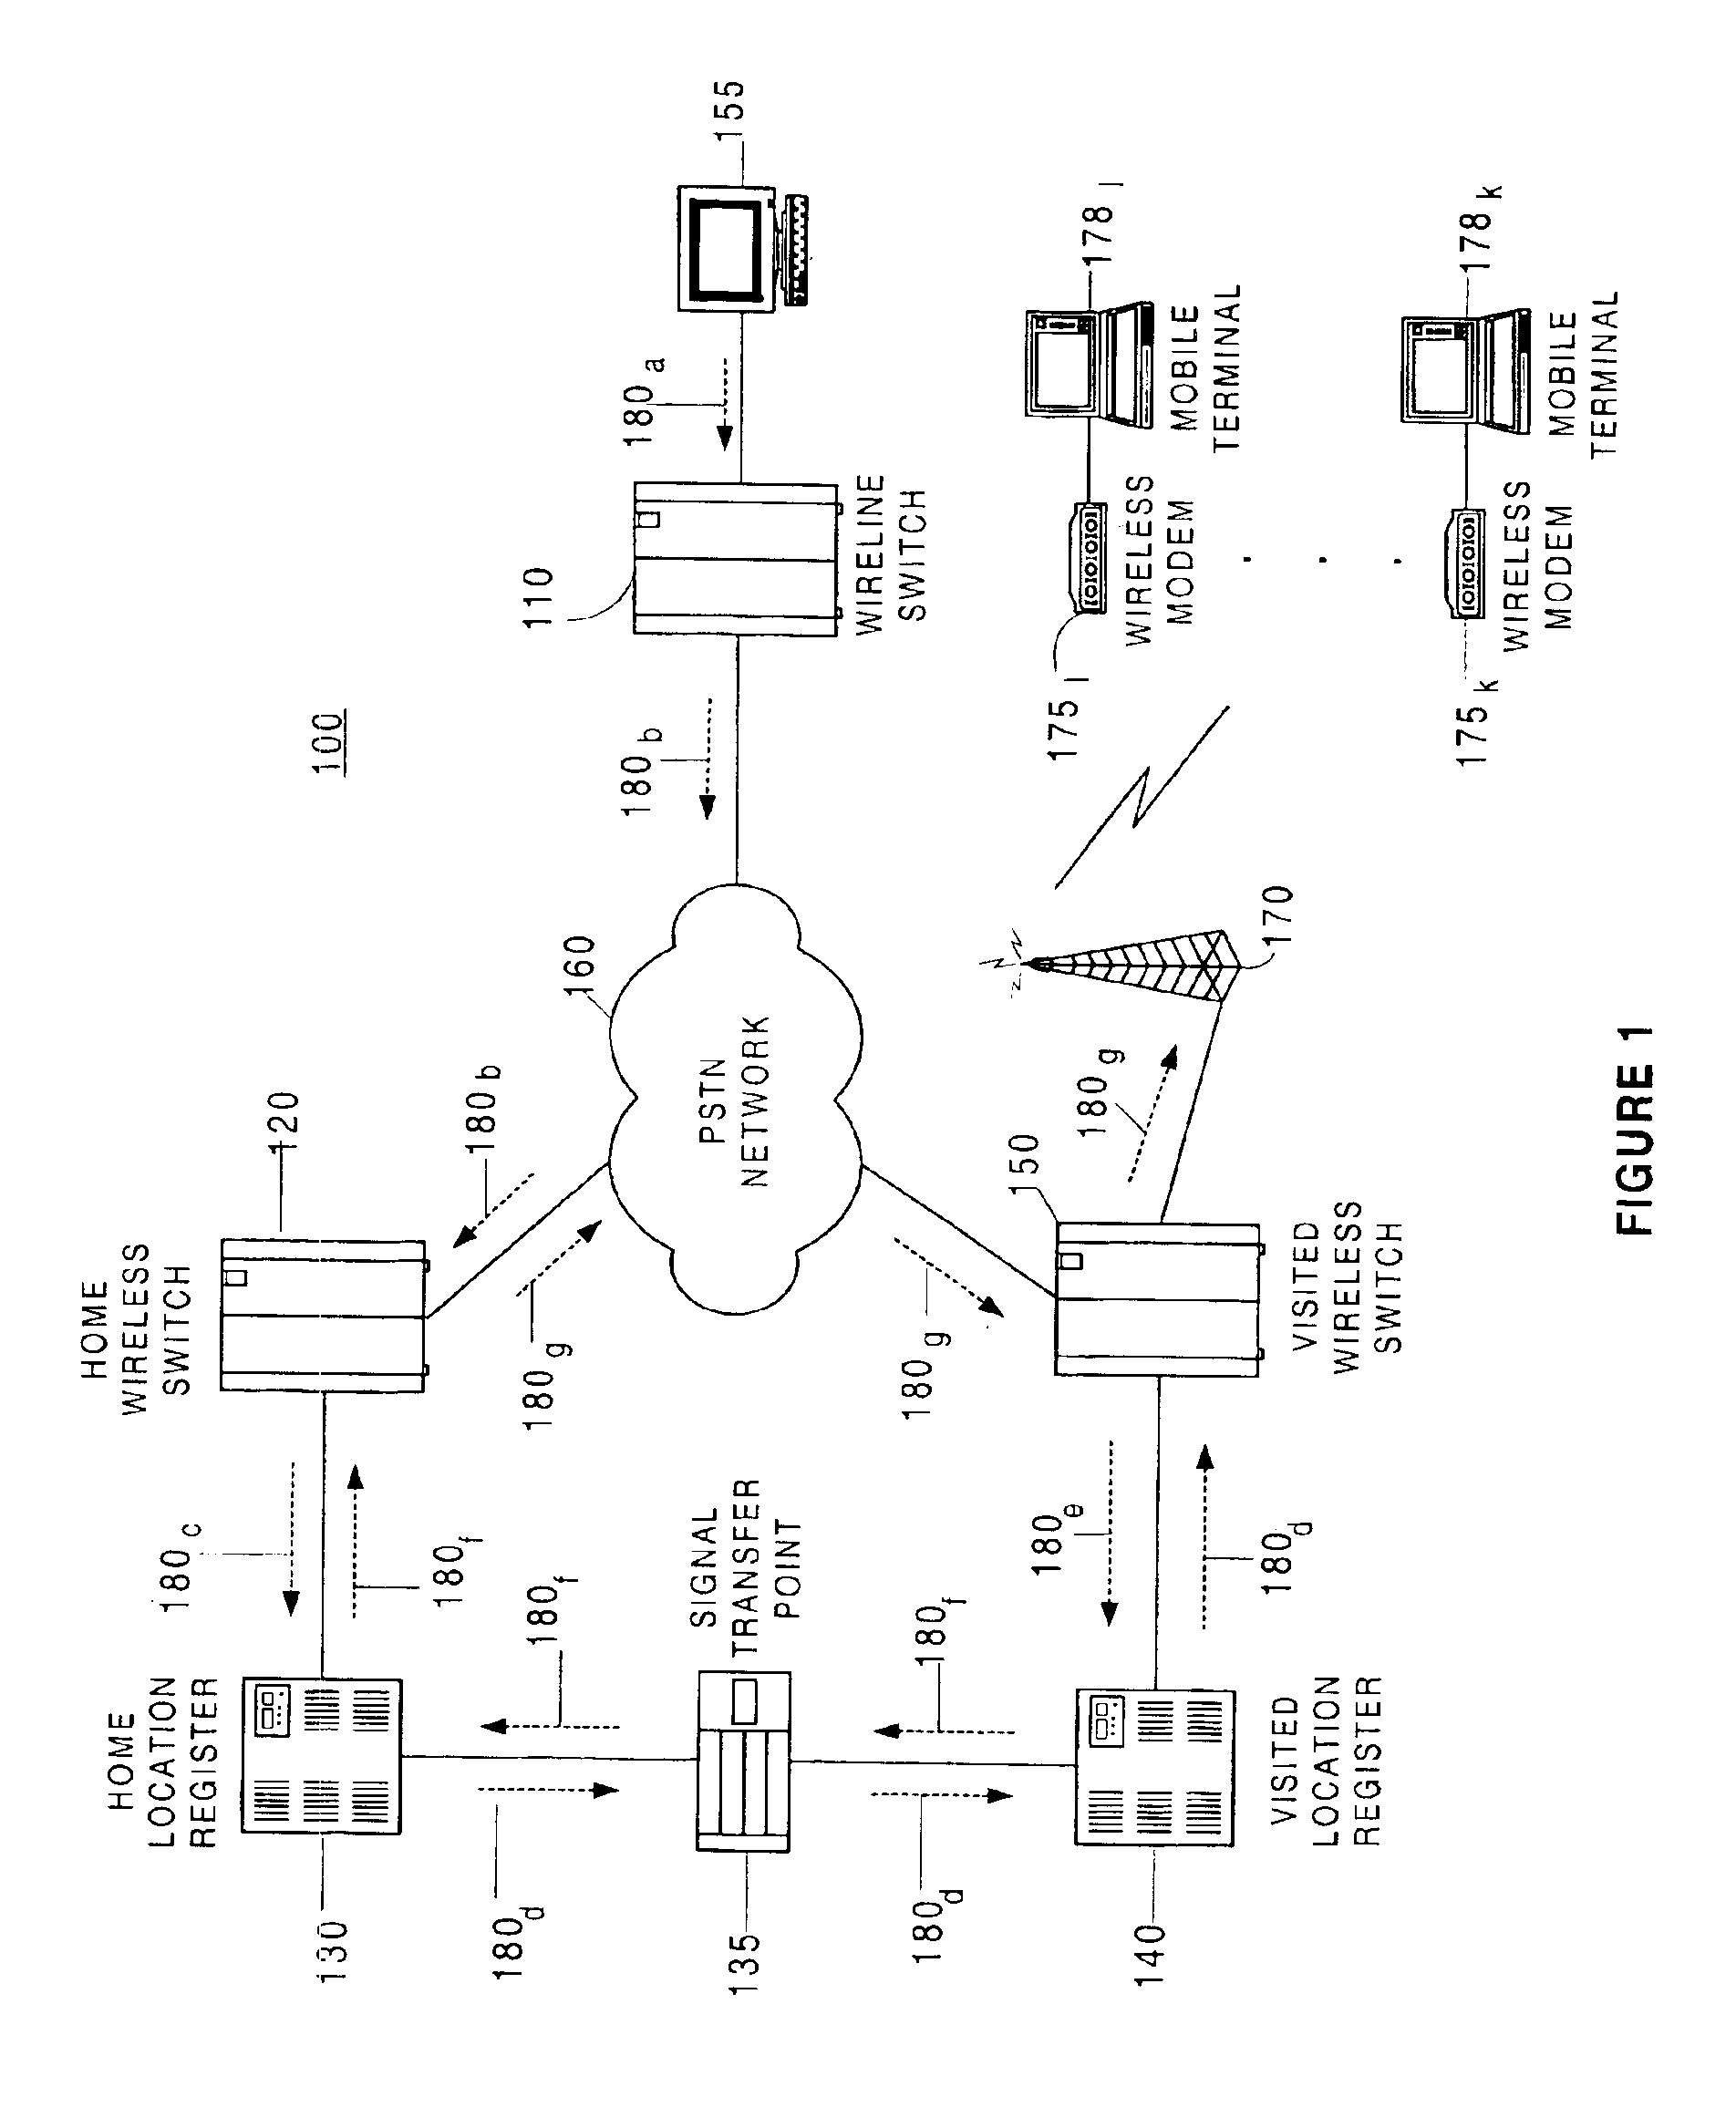 Method and system for communicating data from wireline terminals to mobile terminals